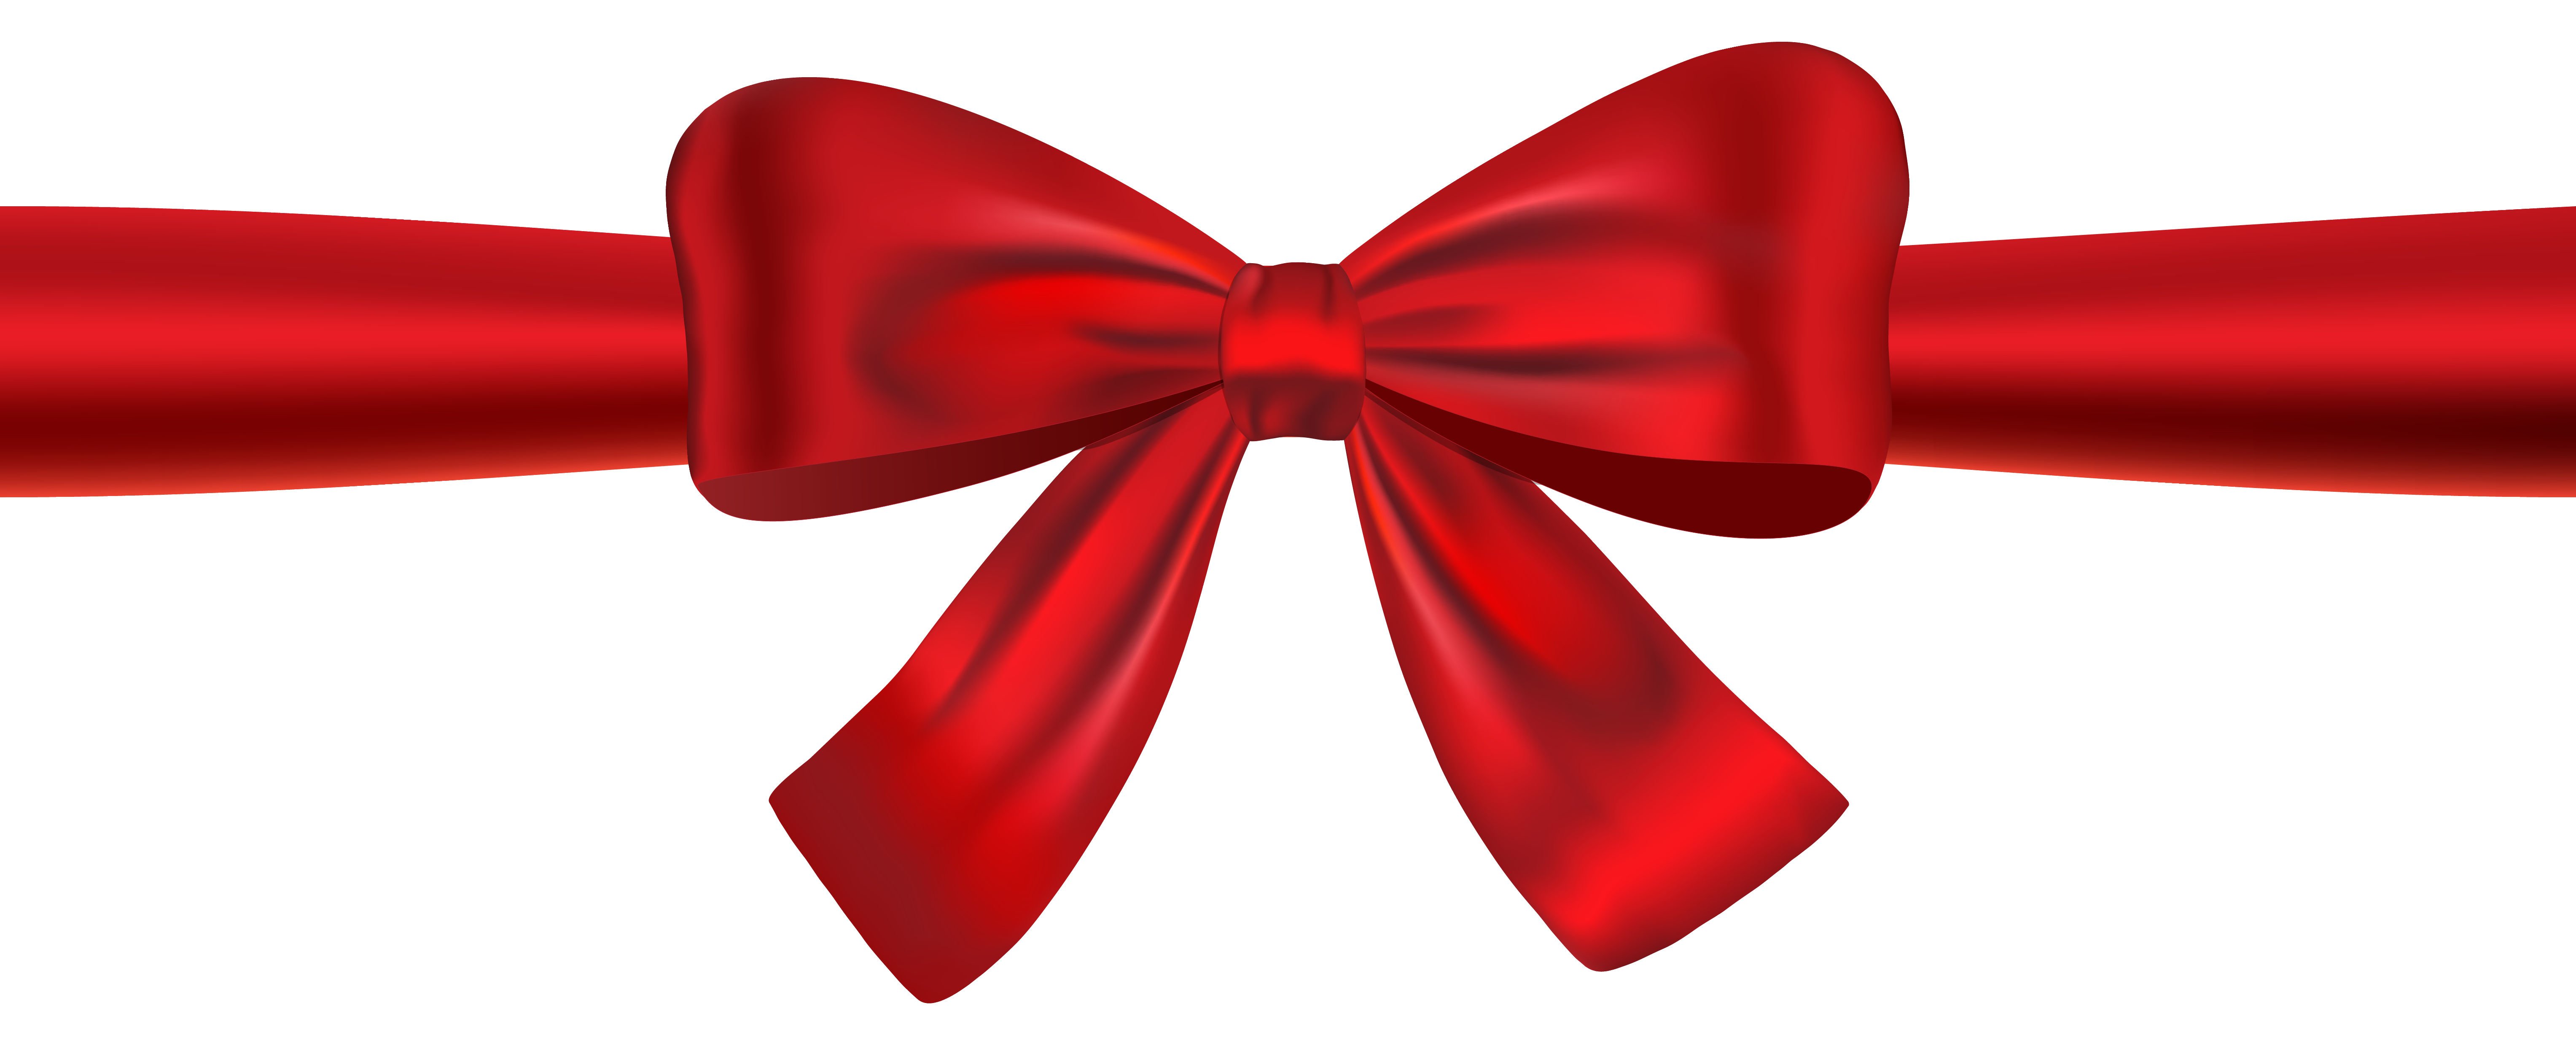 Knot Bow Ribbon Surrender Accede PNG